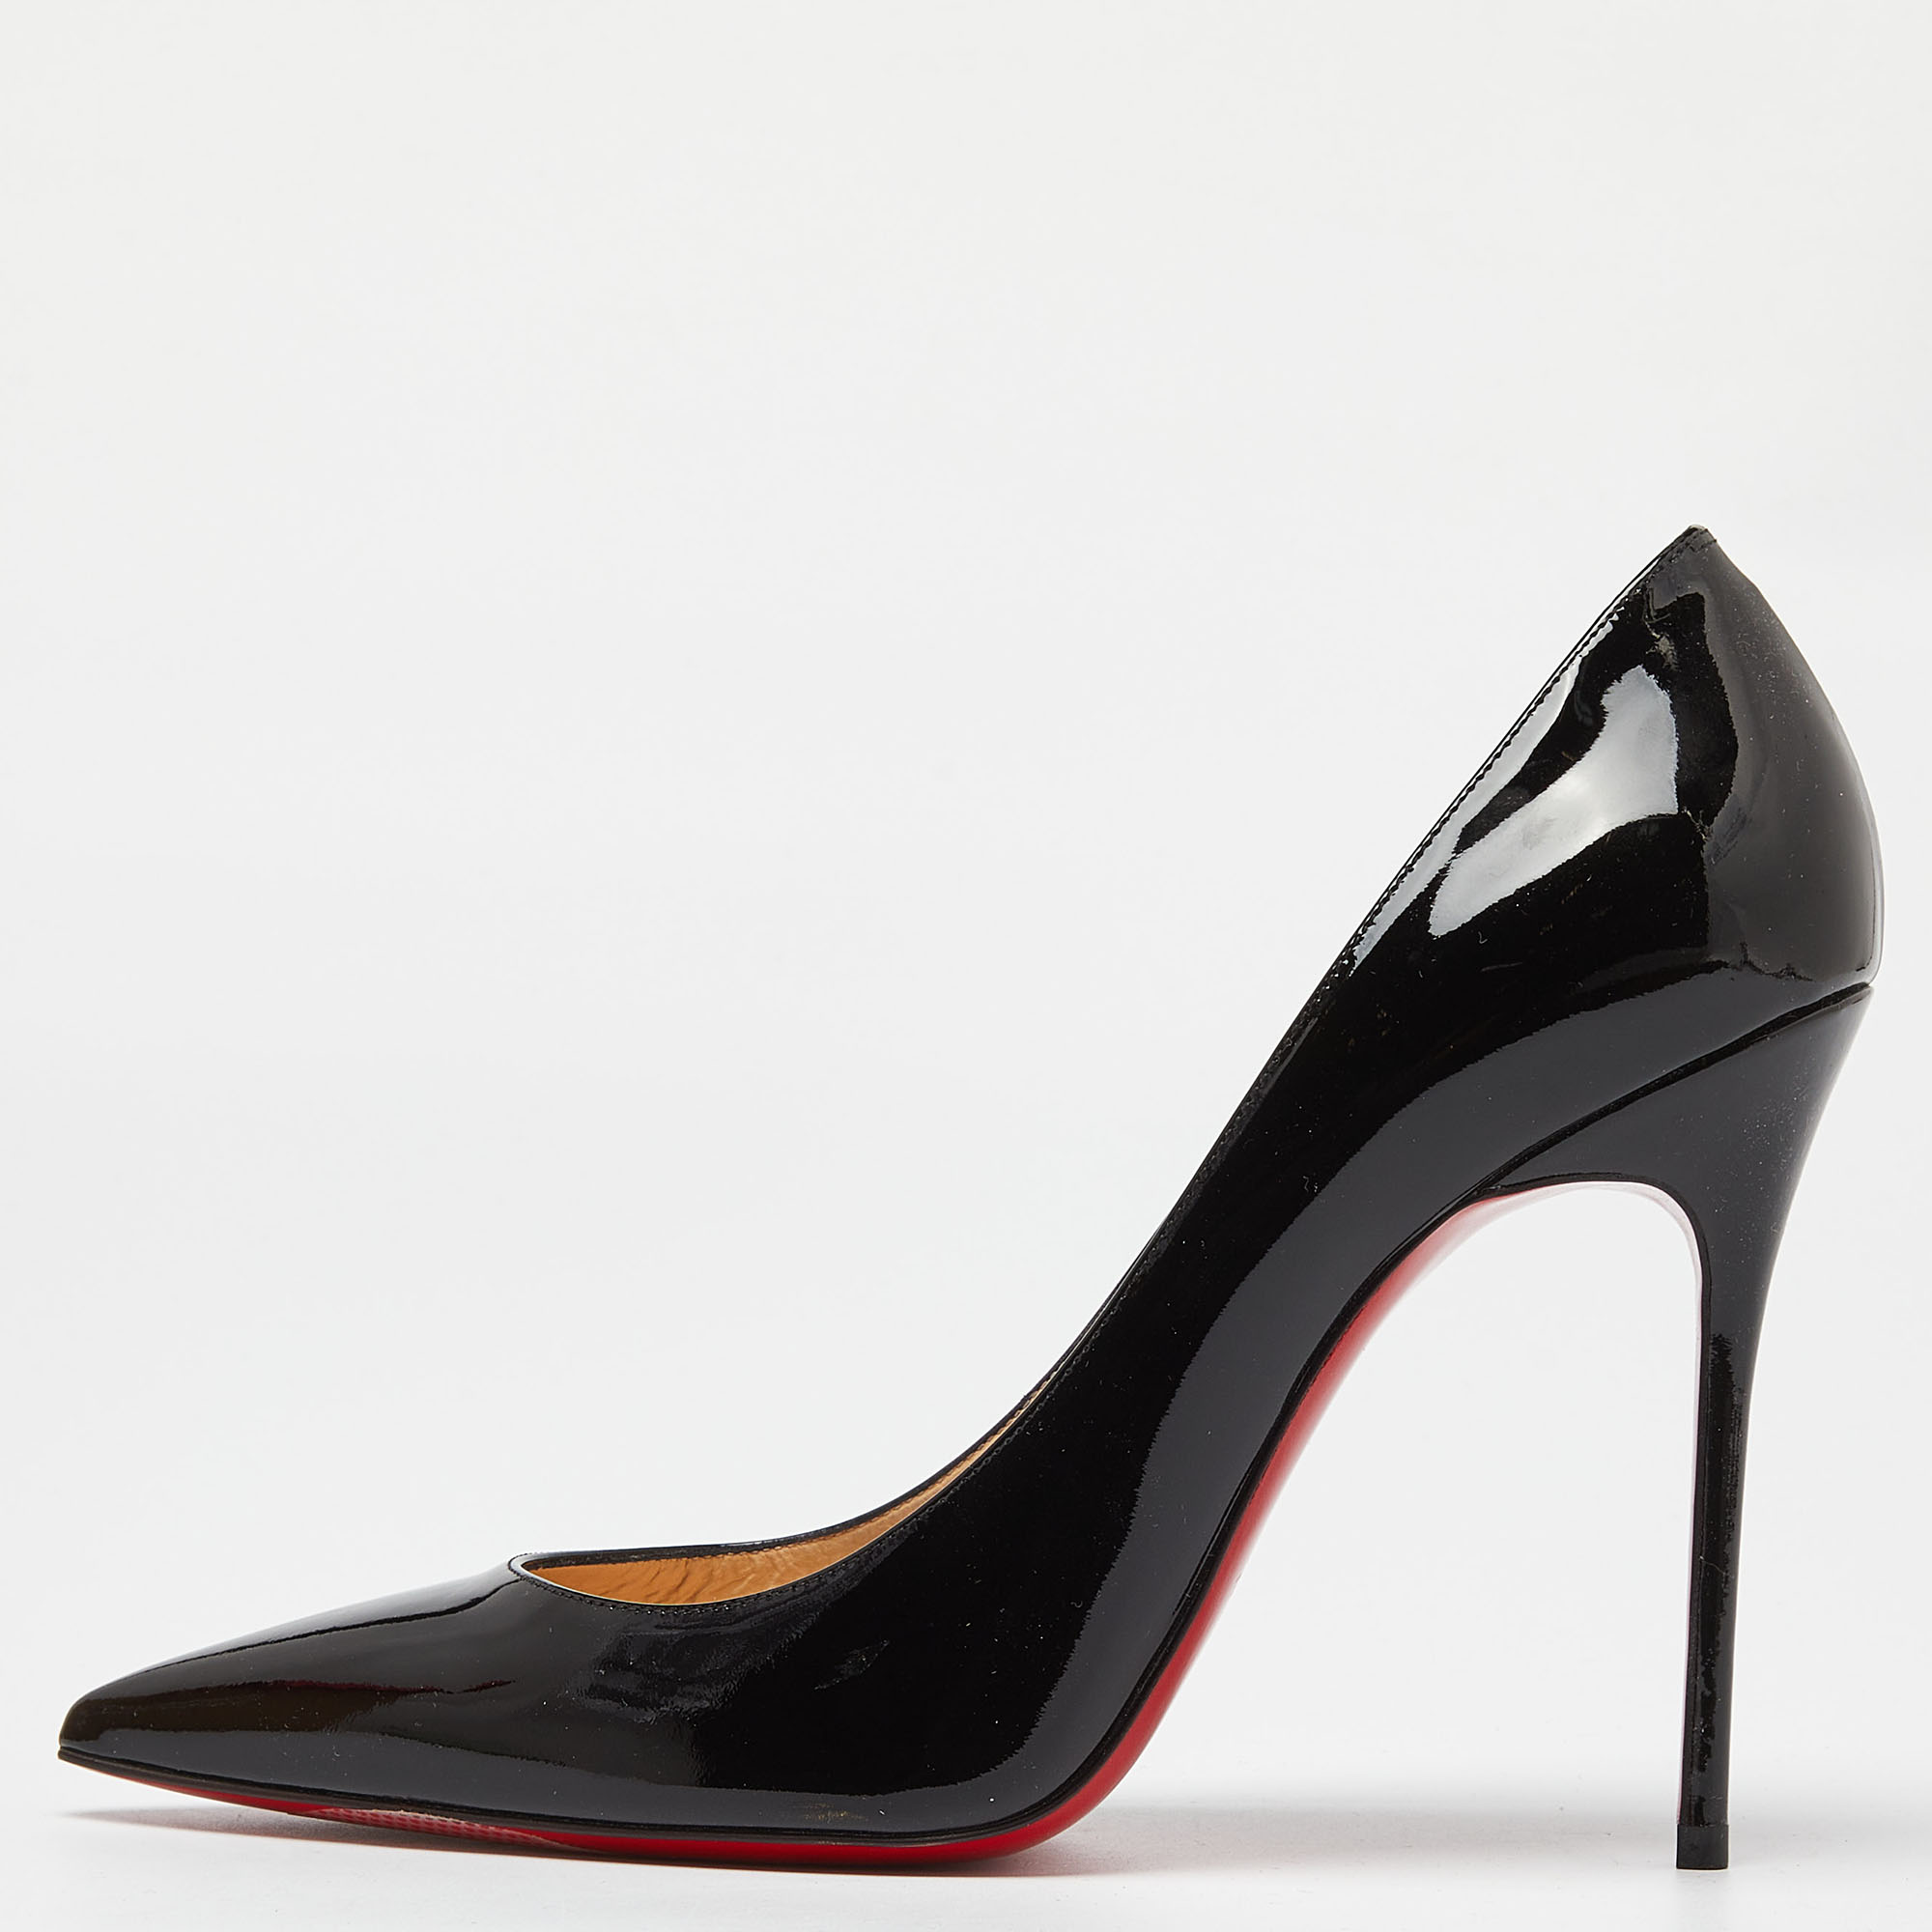 Christian louboutin black patent leather pigalle pointed toe pumps size 40.5